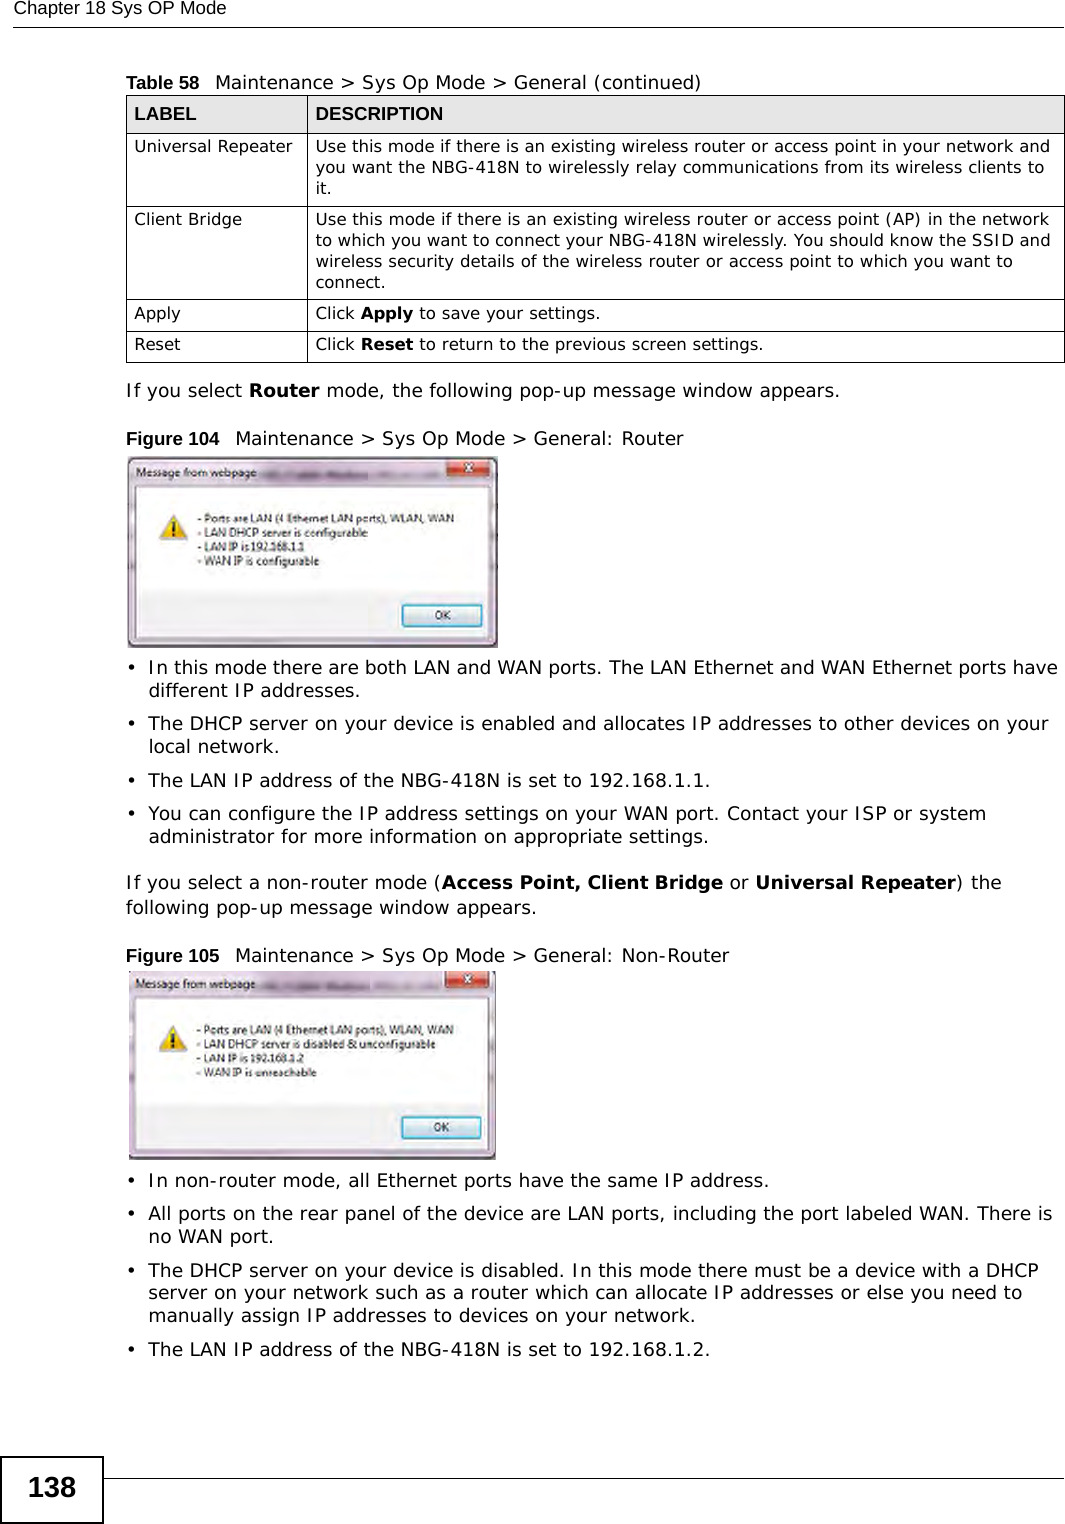 Chapter 18 Sys OP Mode138If you select Router mode, the following pop-up message window appears.Figure 104   Maintenance &gt; Sys Op Mode &gt; General: Router • In this mode there are both LAN and WAN ports. The LAN Ethernet and WAN Ethernet ports have different IP addresses. • The DHCP server on your device is enabled and allocates IP addresses to other devices on your local network. • The LAN IP address of the NBG-418N is set to 192.168.1.1.• You can configure the IP address settings on your WAN port. Contact your ISP or system administrator for more information on appropriate settings.If you select a non-router mode (Access Point, Client Bridge or Universal Repeater) the following pop-up message window appears.Figure 105   Maintenance &gt; Sys Op Mode &gt; General: Non-Router • In non-router mode, all Ethernet ports have the same IP address. • All ports on the rear panel of the device are LAN ports, including the port labeled WAN. There is no WAN port.• The DHCP server on your device is disabled. In this mode there must be a device with a DHCP server on your network such as a router which can allocate IP addresses or else you need to manually assign IP addresses to devices on your network.• The LAN IP address of the NBG-418N is set to 192.168.1.2.Universal Repeater Use this mode if there is an existing wireless router or access point in your network and you want the NBG-418N to wirelessly relay communications from its wireless clients to it.Client Bridge Use this mode if there is an existing wireless router or access point (AP) in the network to which you want to connect your NBG-418N wirelessly. You should know the SSID and wireless security details of the wireless router or access point to which you want to connect.Apply Click Apply to save your settings.Reset Click Reset to return to the previous screen settings.Table 58   Maintenance &gt; Sys Op Mode &gt; General (continued)LABEL DESCRIPTION